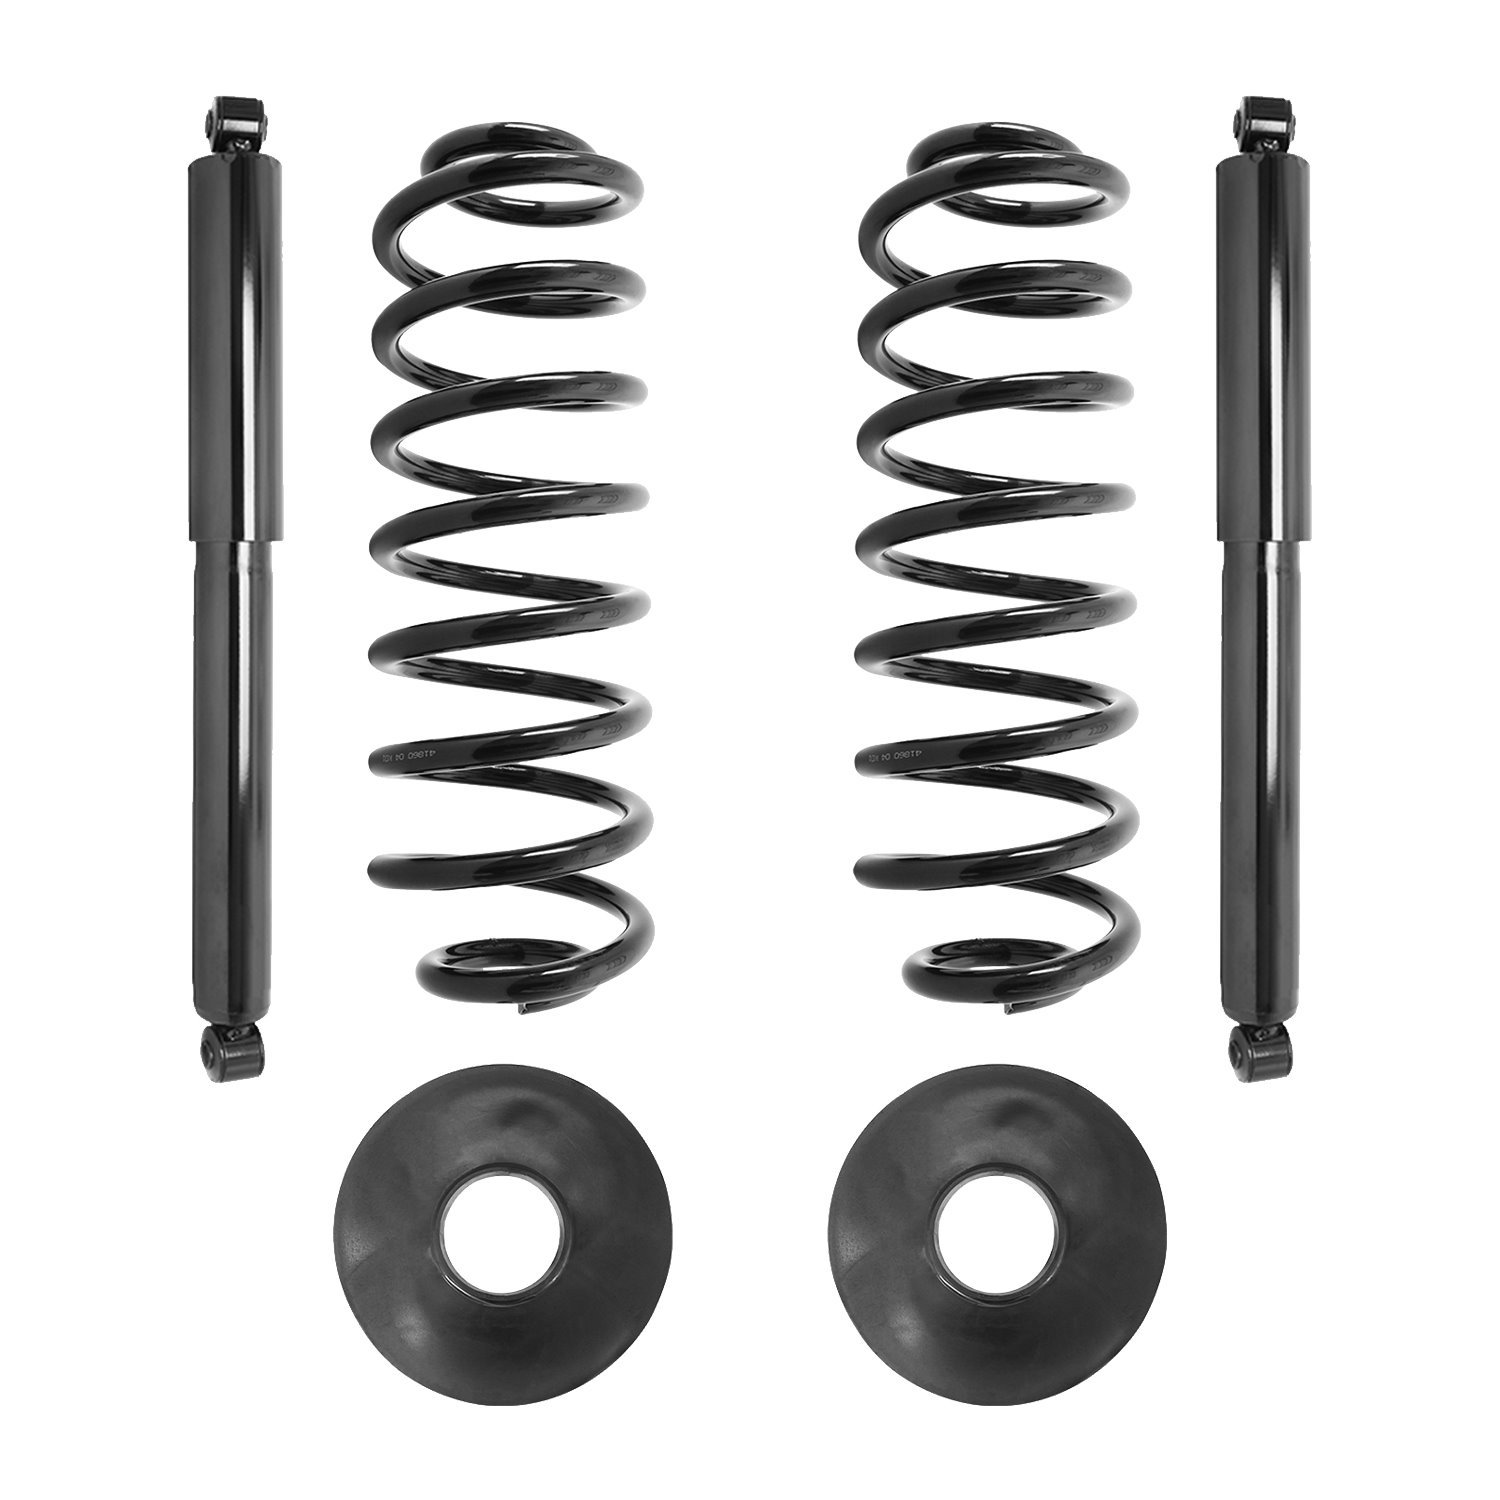 65005c Air Spring To Coil Spring Conversion Kit Fits Select Ford Expedition, Lincoln Navigator